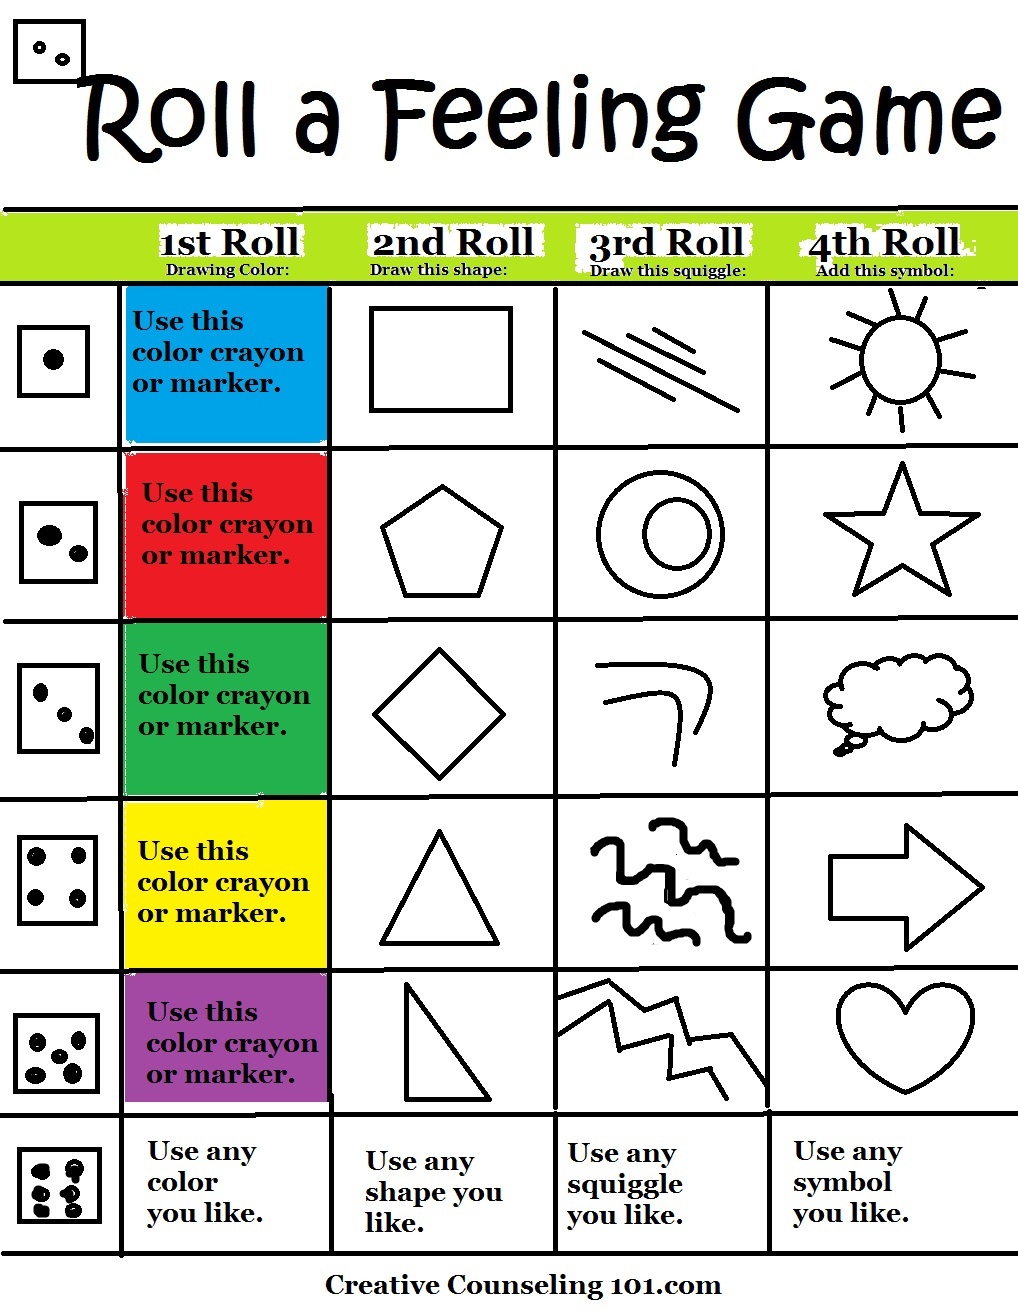 Beyond Art Therapy Roll-A-Feelings Game - Free Printable Counseling Worksheets